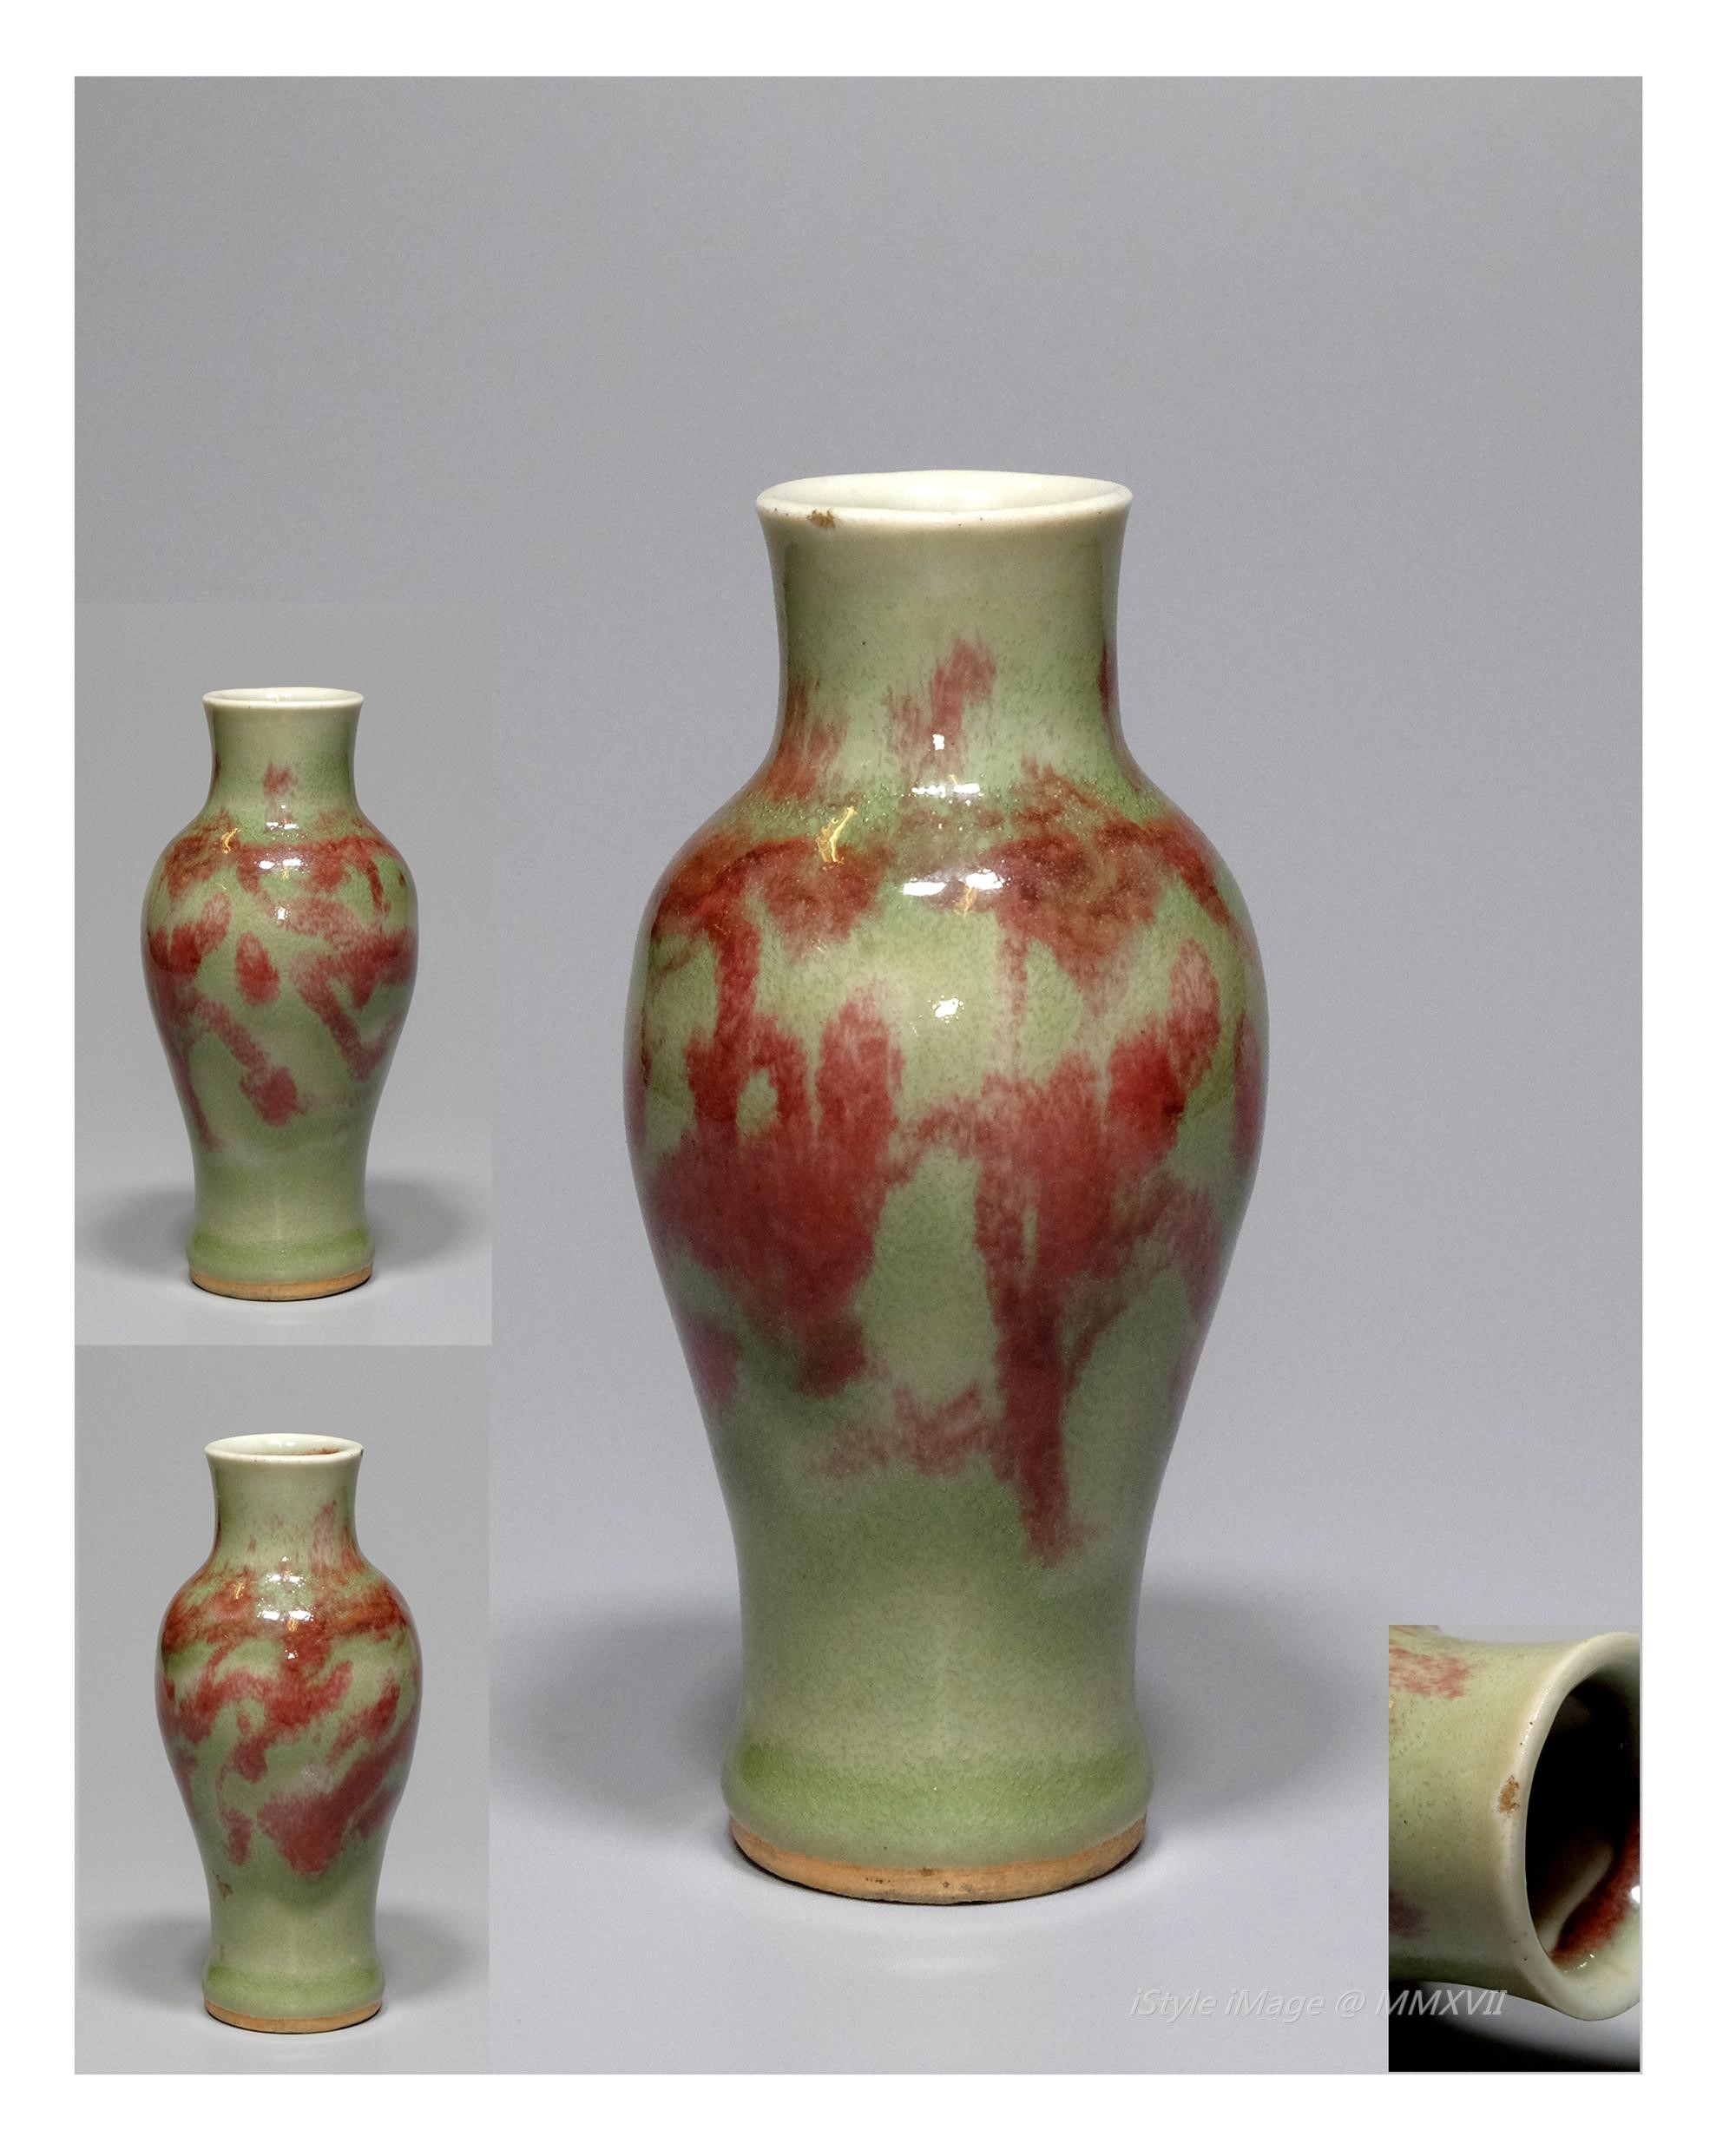 <br><h4>Lot 23 : An attractive russet-splashed green-glazed elegant ovoid shaped vase  ( 50's last century )</h4>
							This attractive vase enameled with 'Song Style' red russet-splashed on green ground, has very elegant oval-shaped body rose from the bottom to a high-waist cylinder neck. [Flaw on the mouth rim]
							<br>Measurements (H) high 11.5 CM, (W)width 5 CM<br><br><br>優雅的卵形綠釉鐵銹班花瓶  ( 上世紀五十年代 )<br>這個有魅力的“宋代風格”花瓶，釉上綠色地與紅褐色鐵銹班，有非常優雅的橢圓形的身體從底部到高腰圓柱瓶頸。 [瓶頸上有瑕疵]<br>尺寸(H)高 11.5 厘米,  (W)濶5 厘米